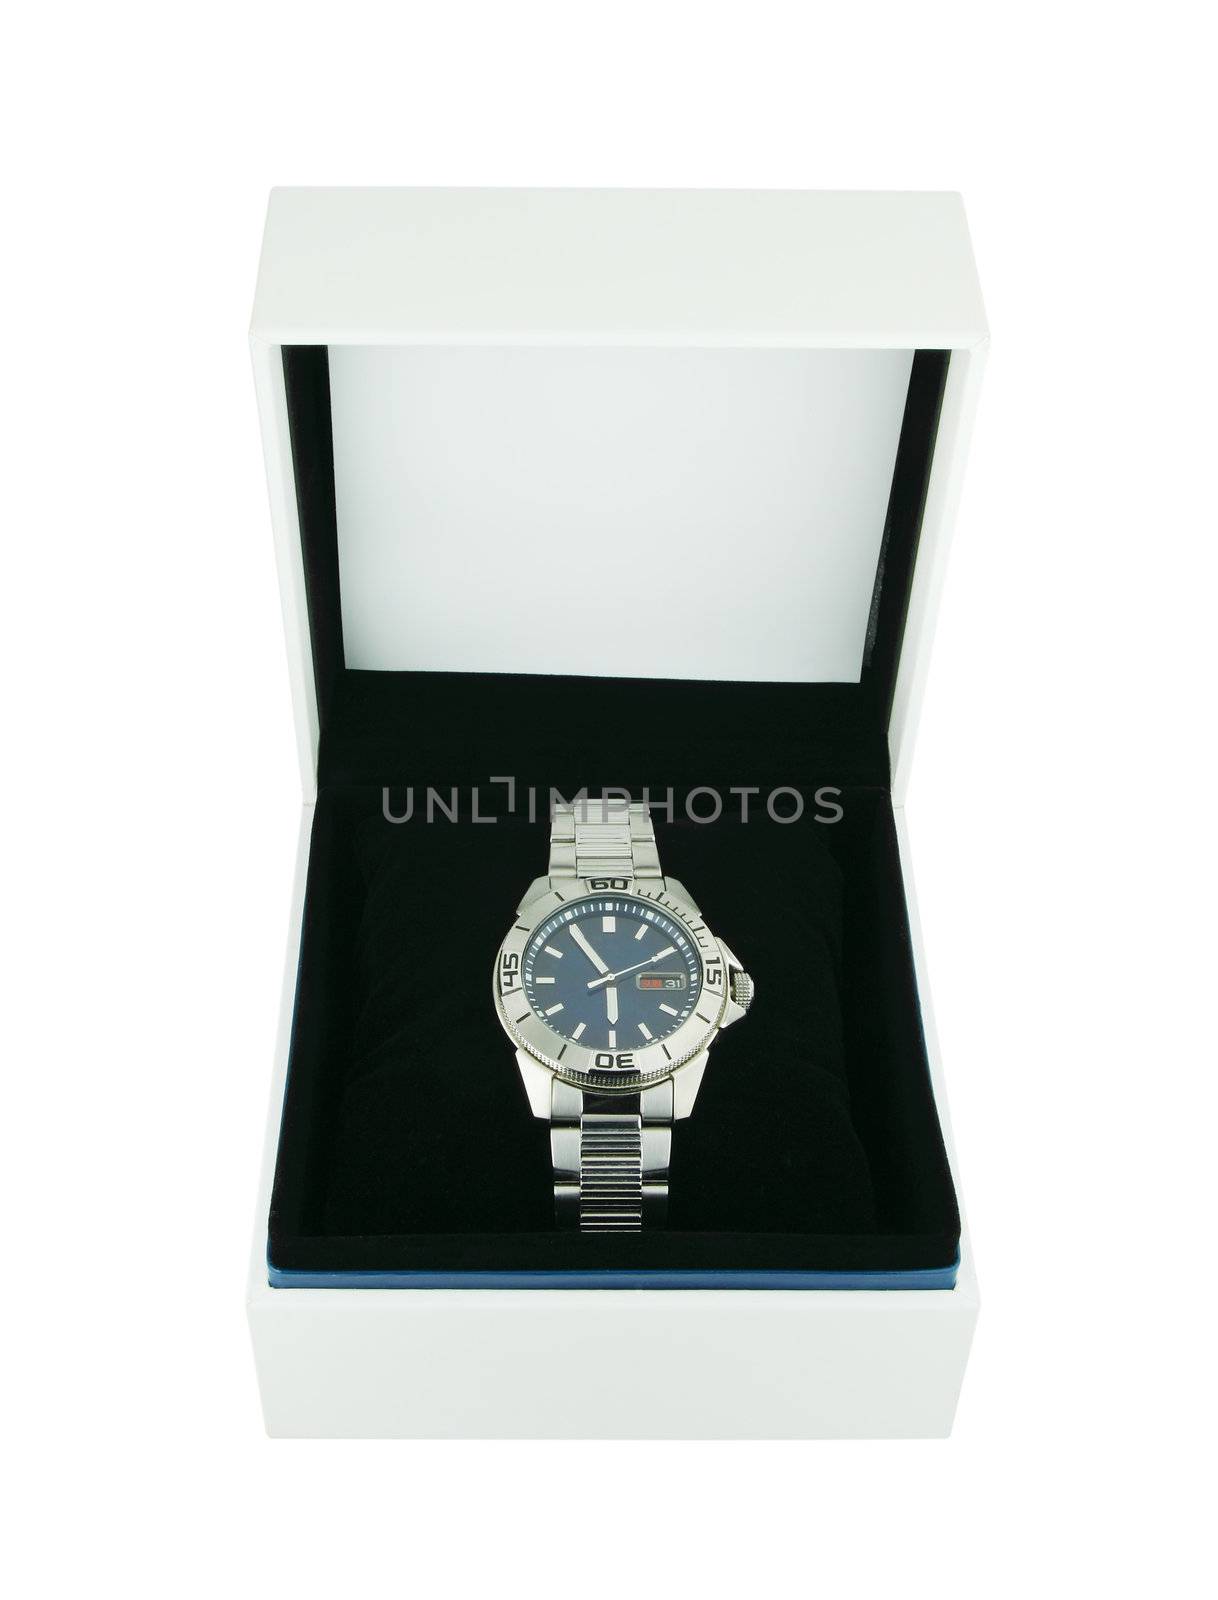 white box with luxury watch on white background